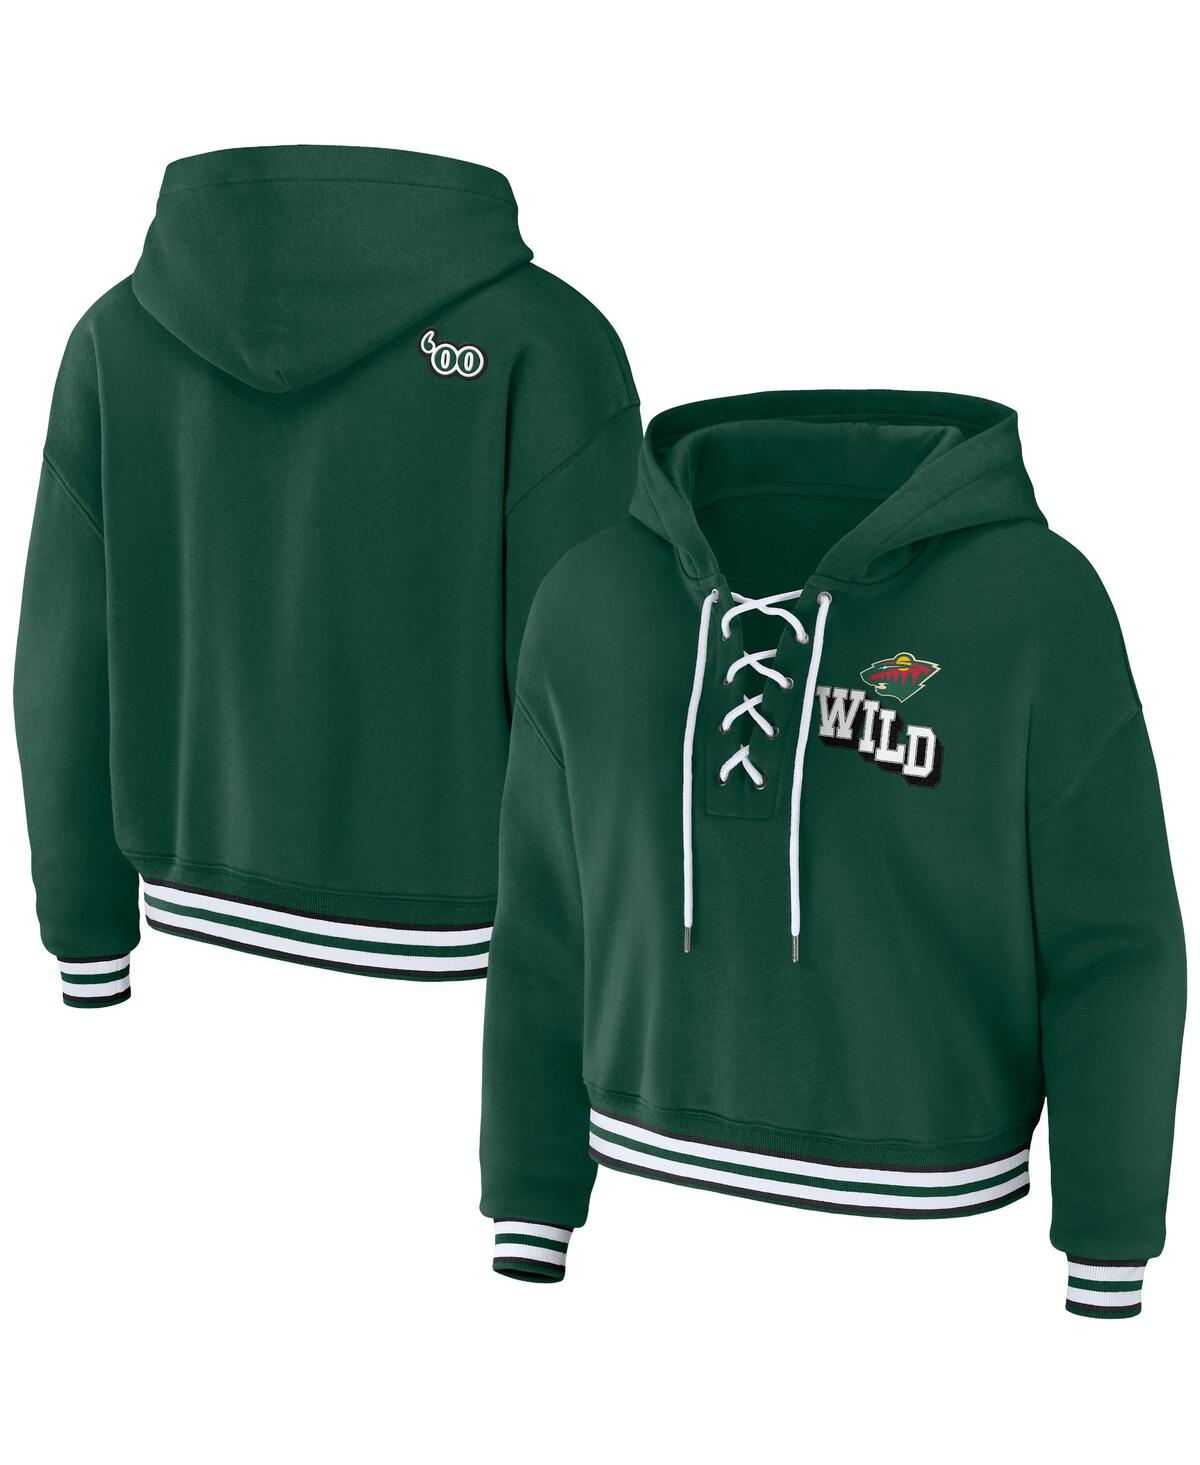 Shop Wear By Erin Andrews Women's  Green Minnesota Wild Lace-up Pullover Hoodie